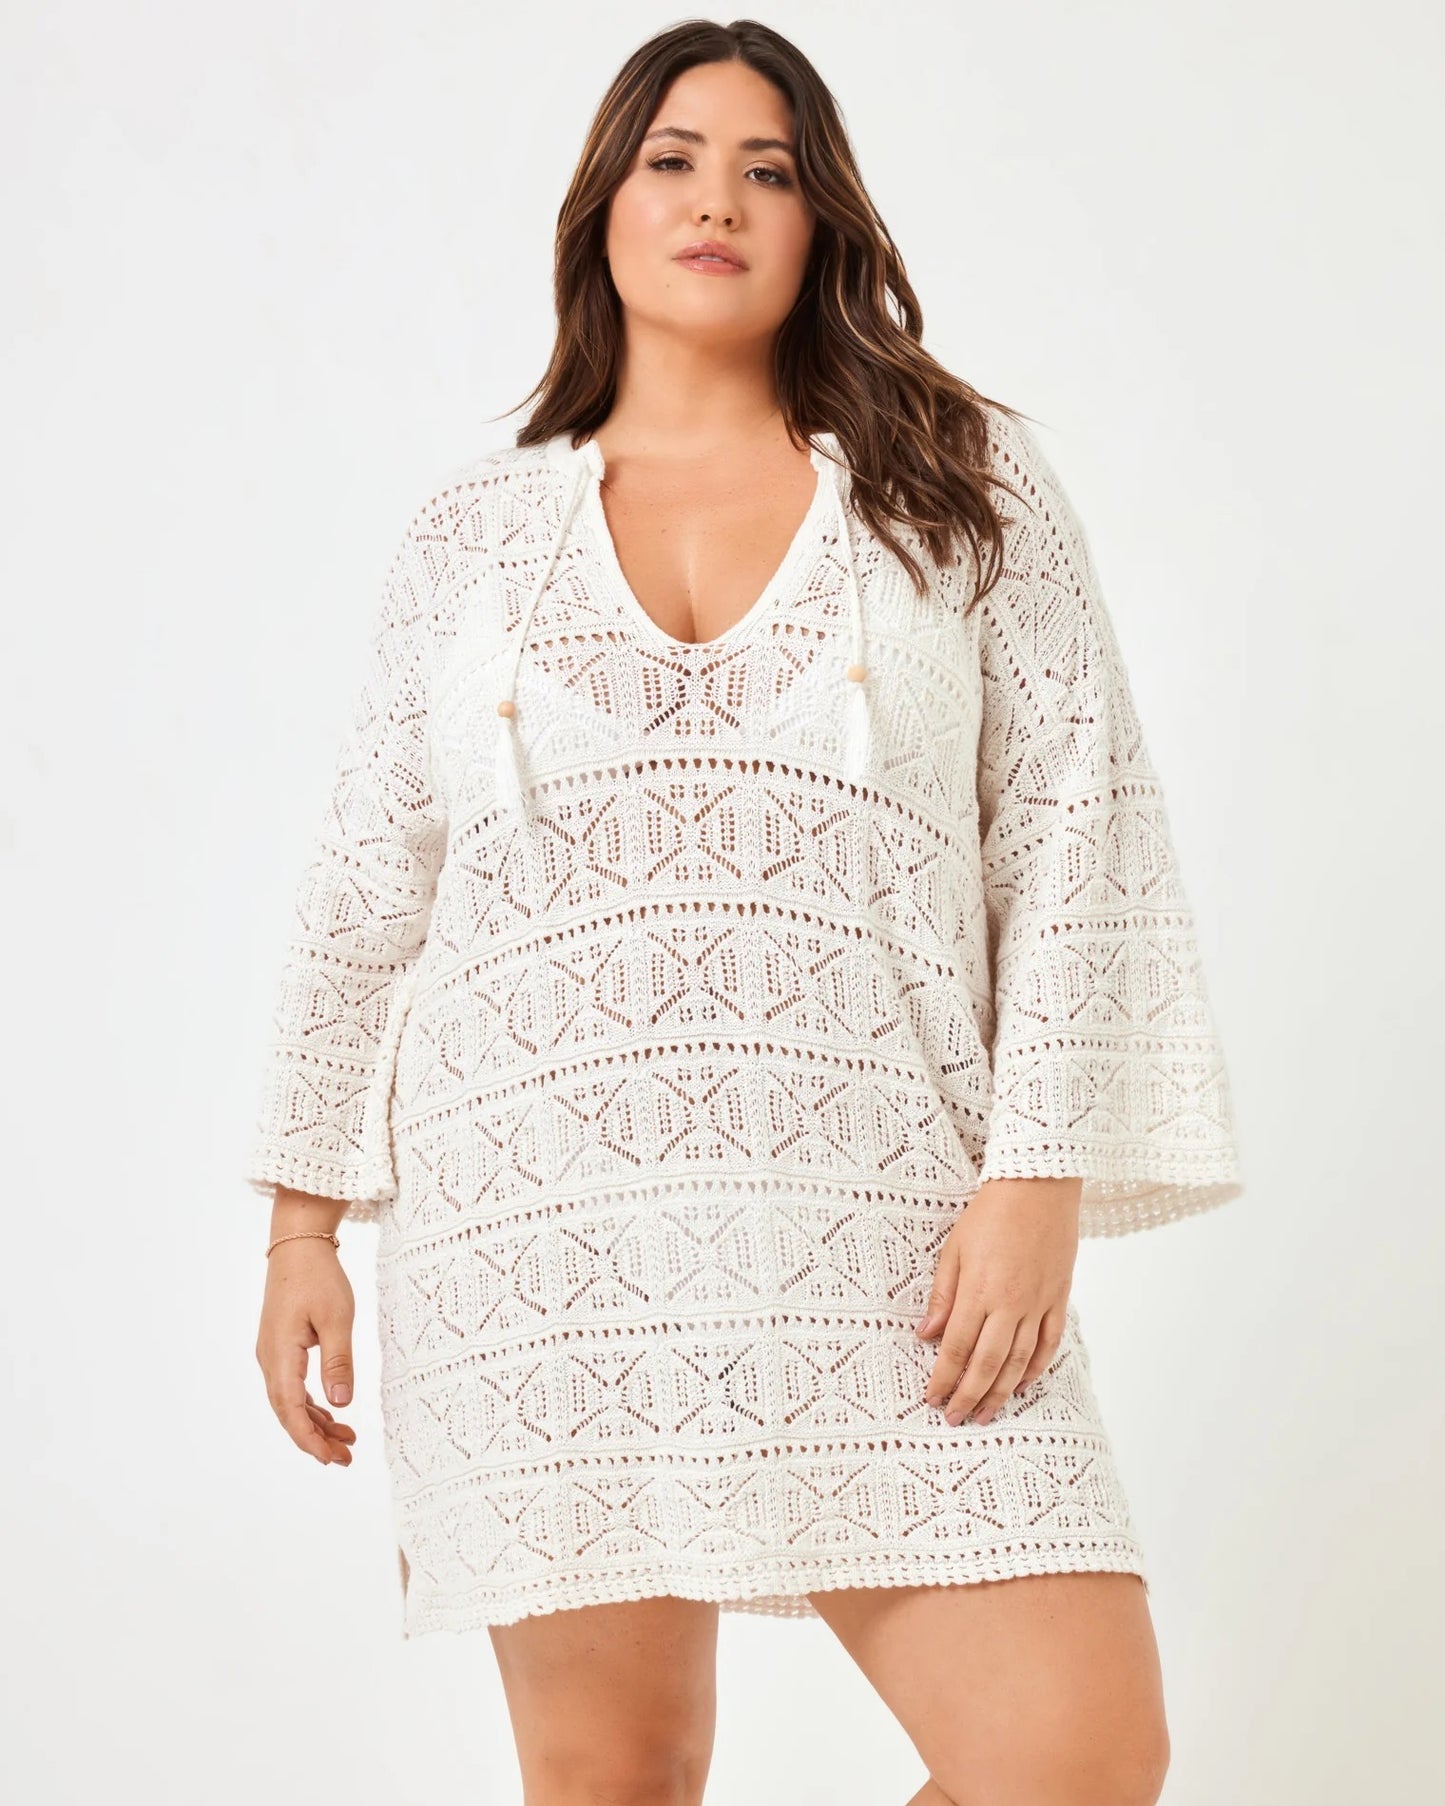 LSpace Diamond Eyes Cover-Up in Cream